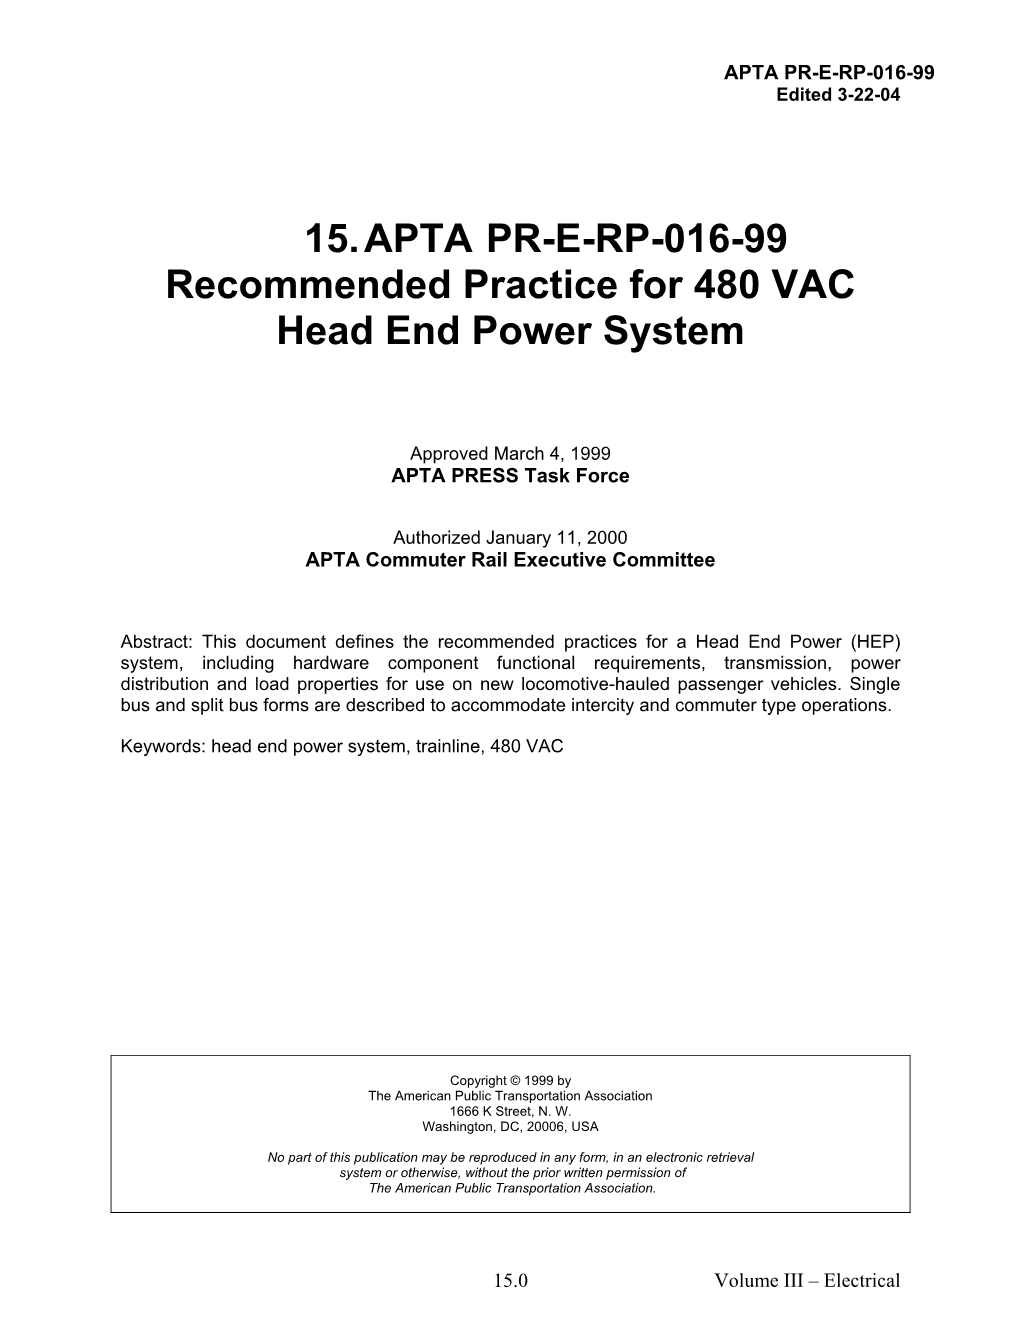 Recommended Practice for 480 VAC Head End Power System